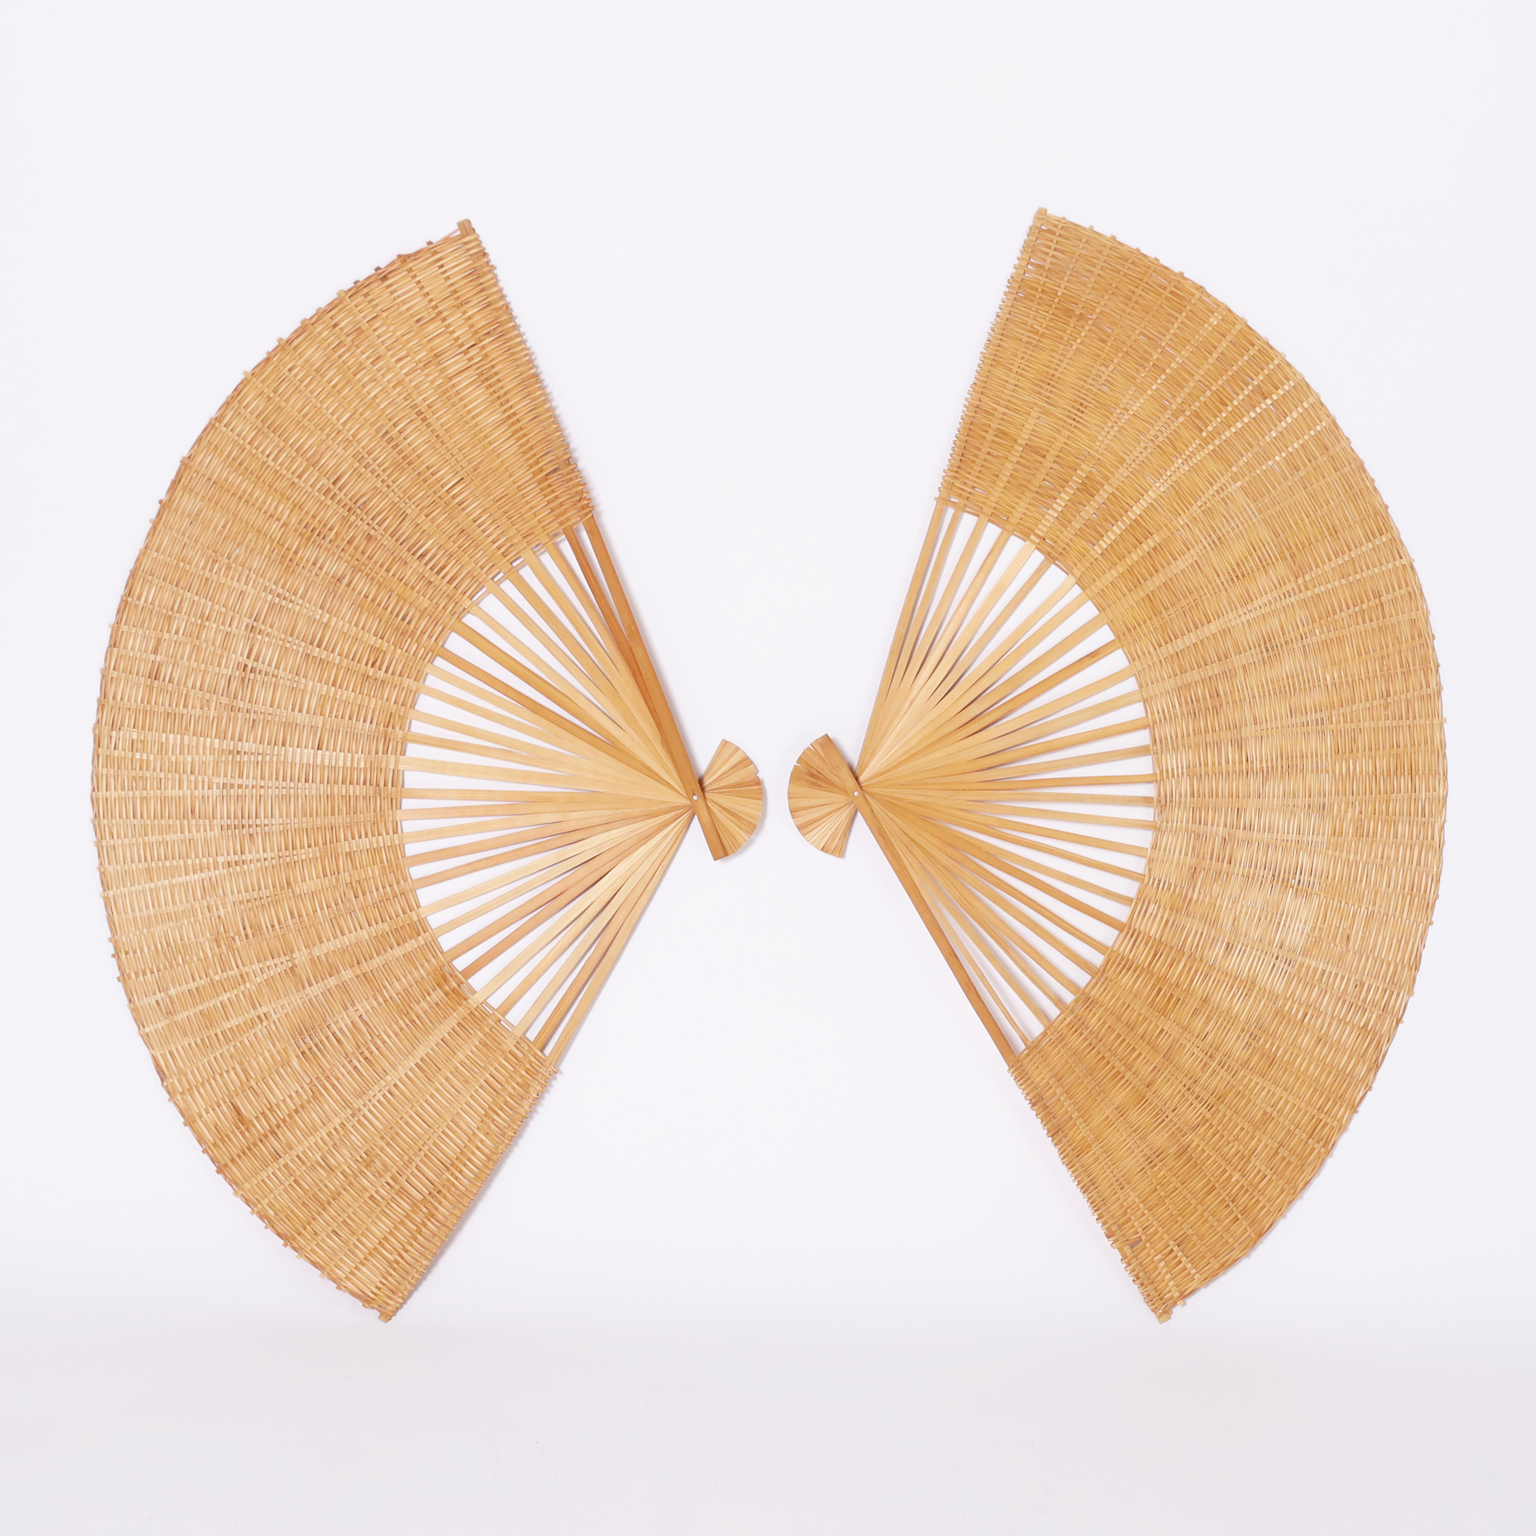 Vintage Wicker and Rattan Hand Fans